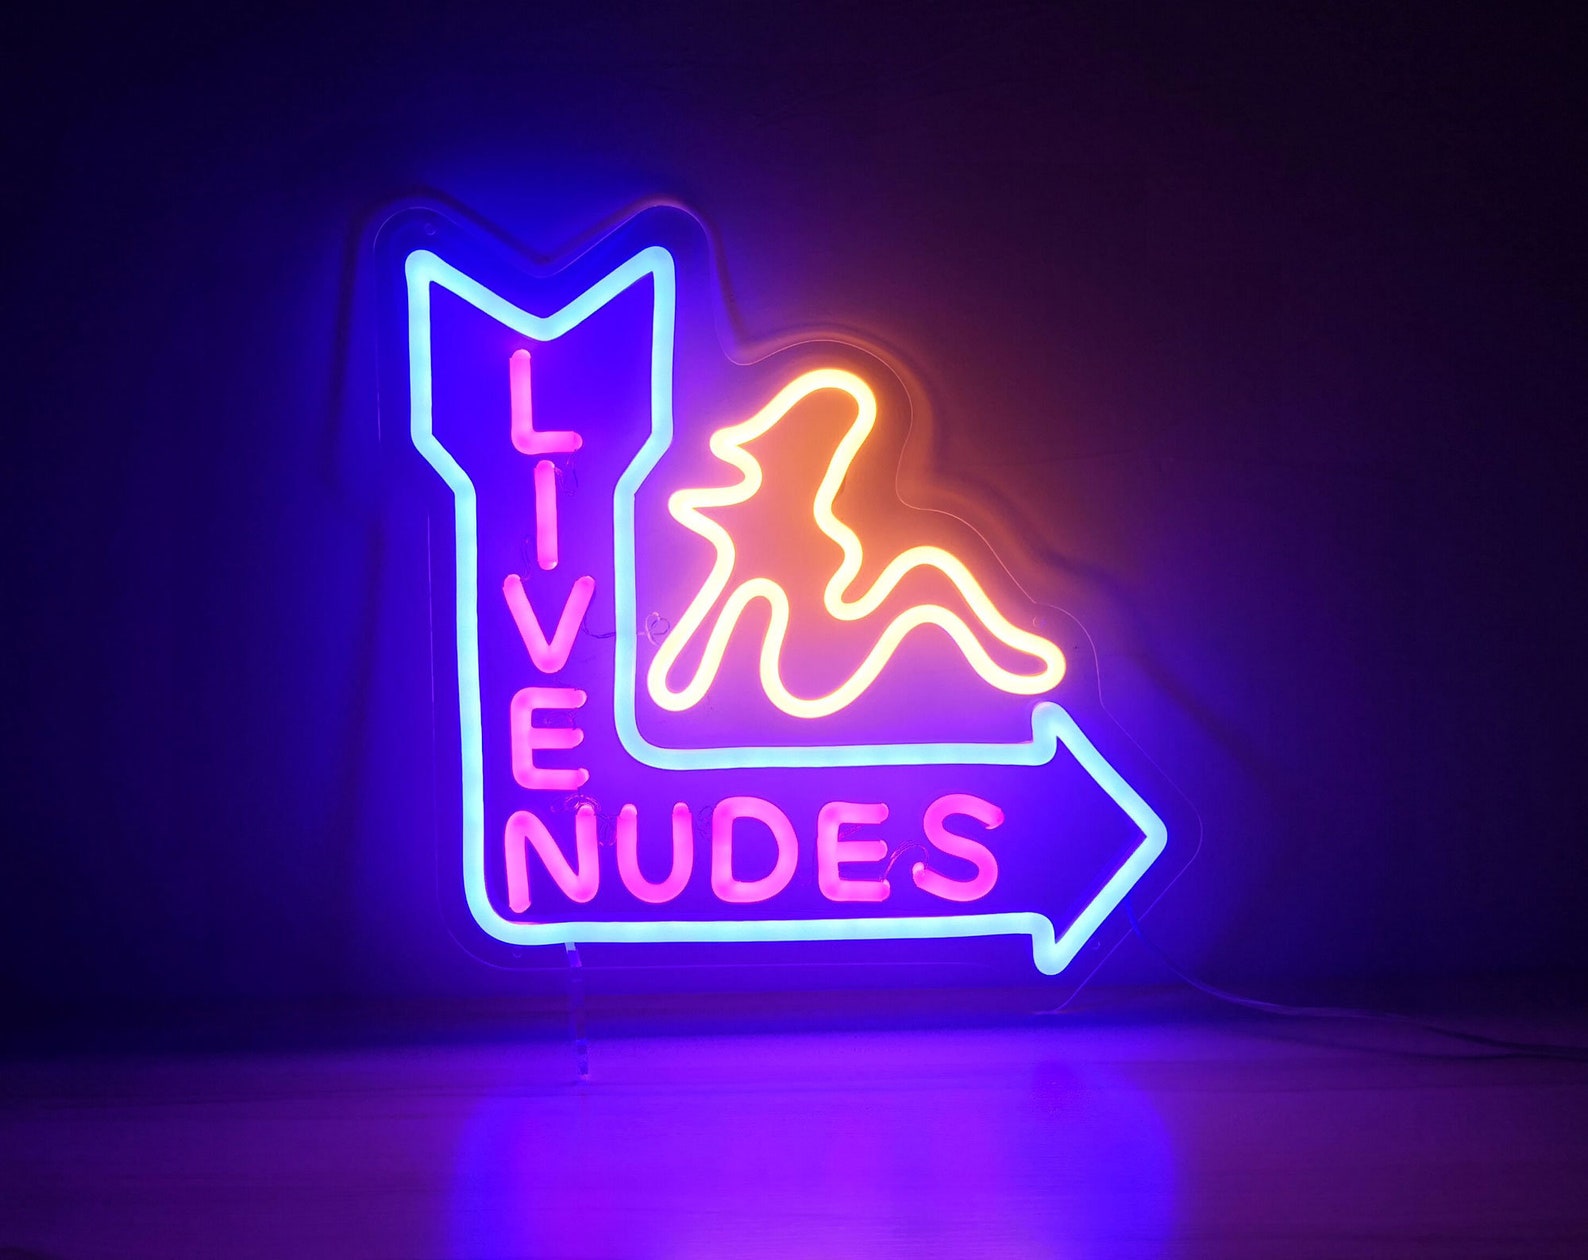 Live Nudes Neon Sign Lights Dancing Clubs Bar Strip Club image 1.